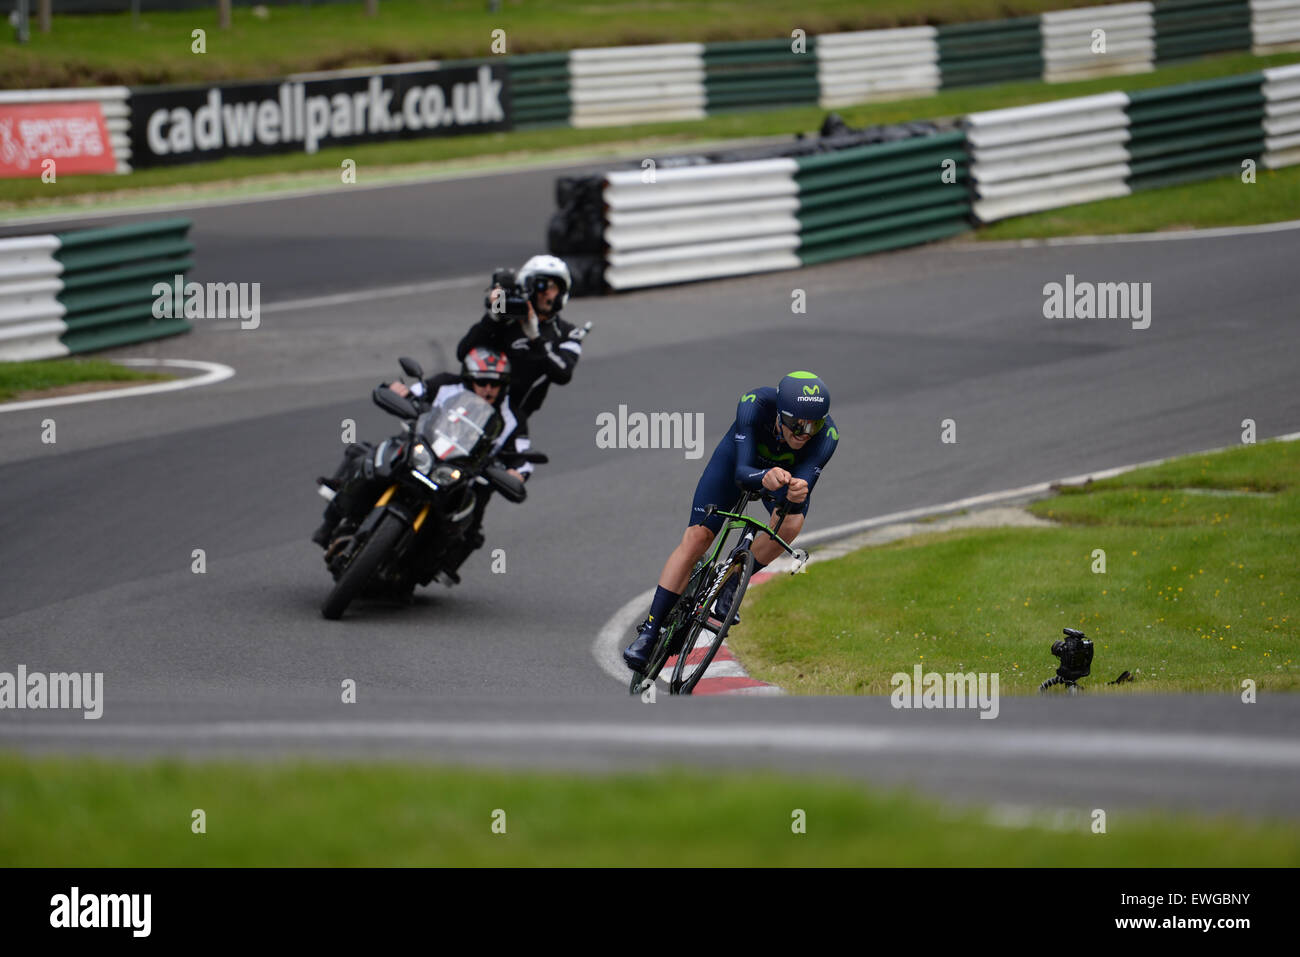 Lincoln, UK. 25th June, 2015. Alex Dowsett enters a corner at the British Cycling Time Trial Championships at Cadwell Park near Lincoln, United Kingdom on 25 June 2015. Credit:  Andrew Peat/Alamy Live News Stock Photo